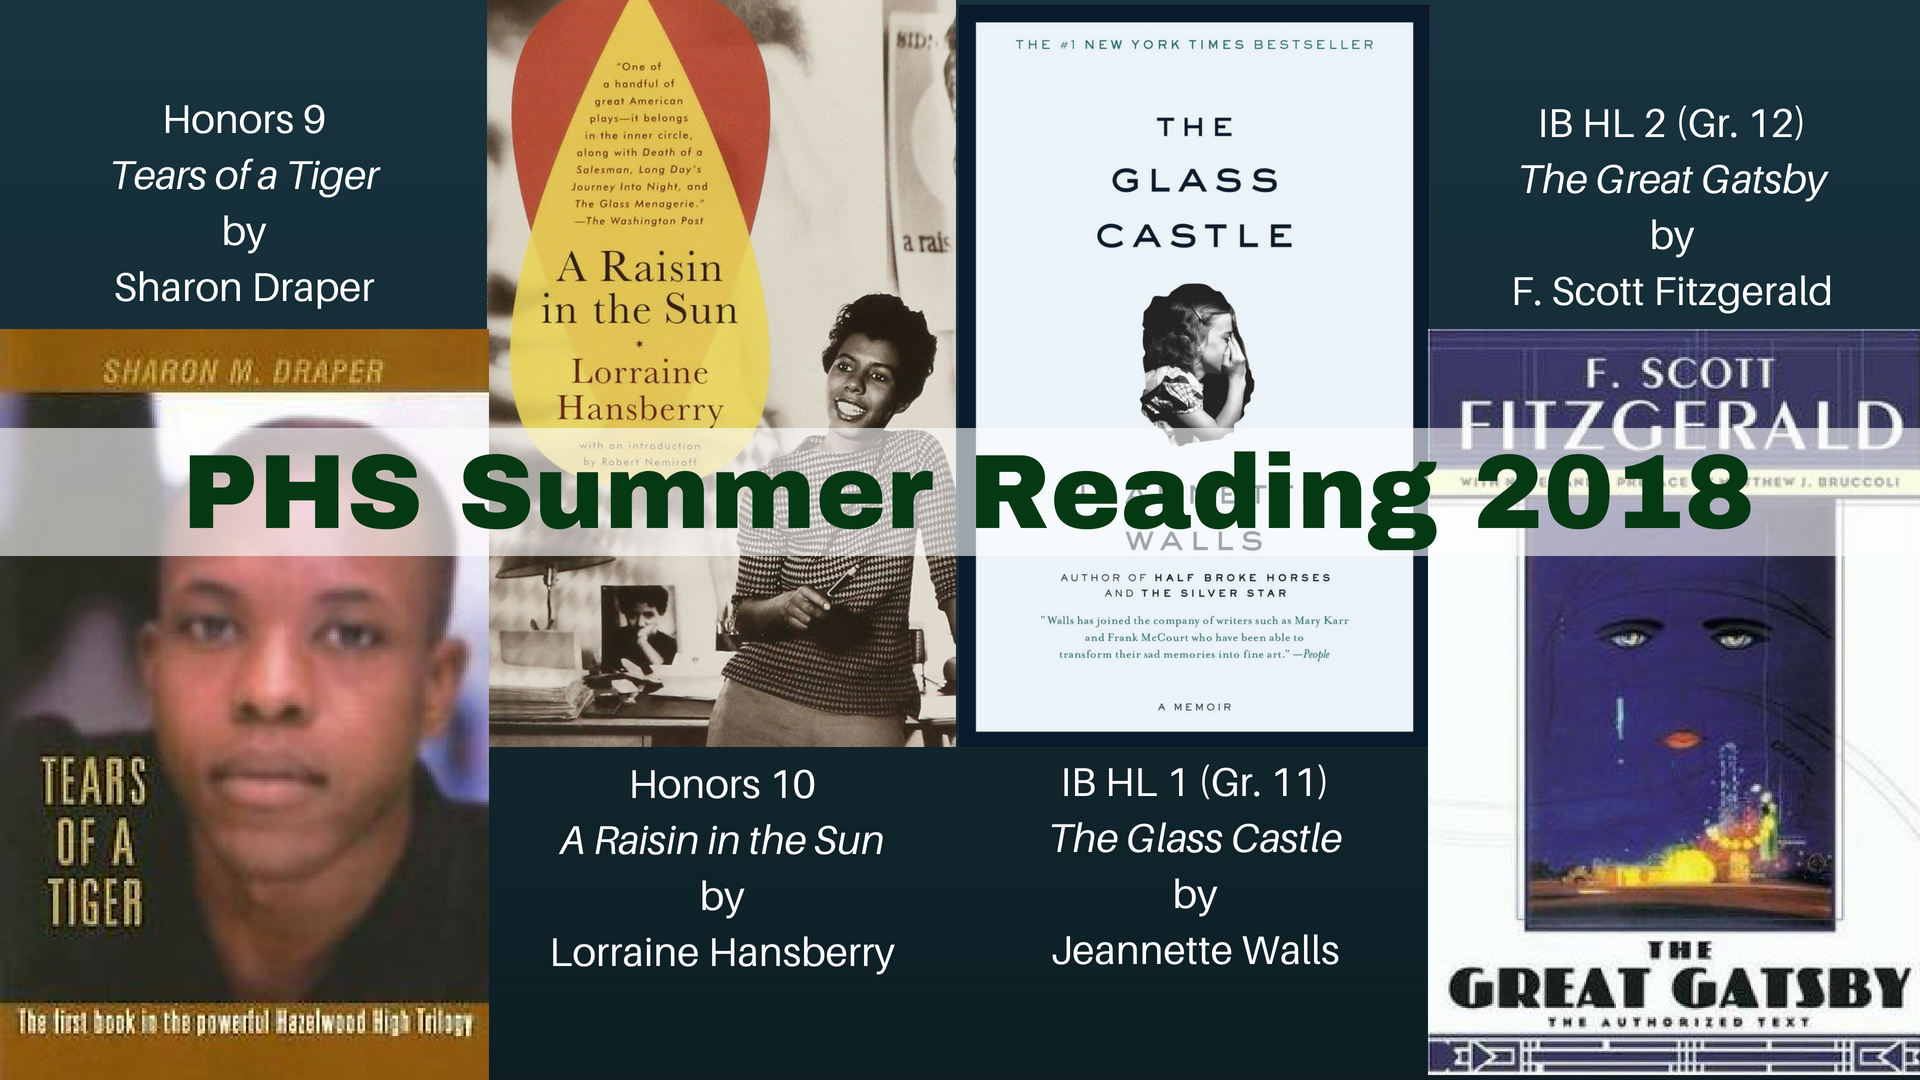 Book covers for Summer Reading 2018: Honors 9 - Tears of a Tiger by Sharon Draper, Honors 10 - A Raisin in the Sun by Lorraine Hansberry, IB 11 - The Glass Castle by Jeannette Walls, IB 12 - The Great Gatsby by F. Scott Fitzgerald